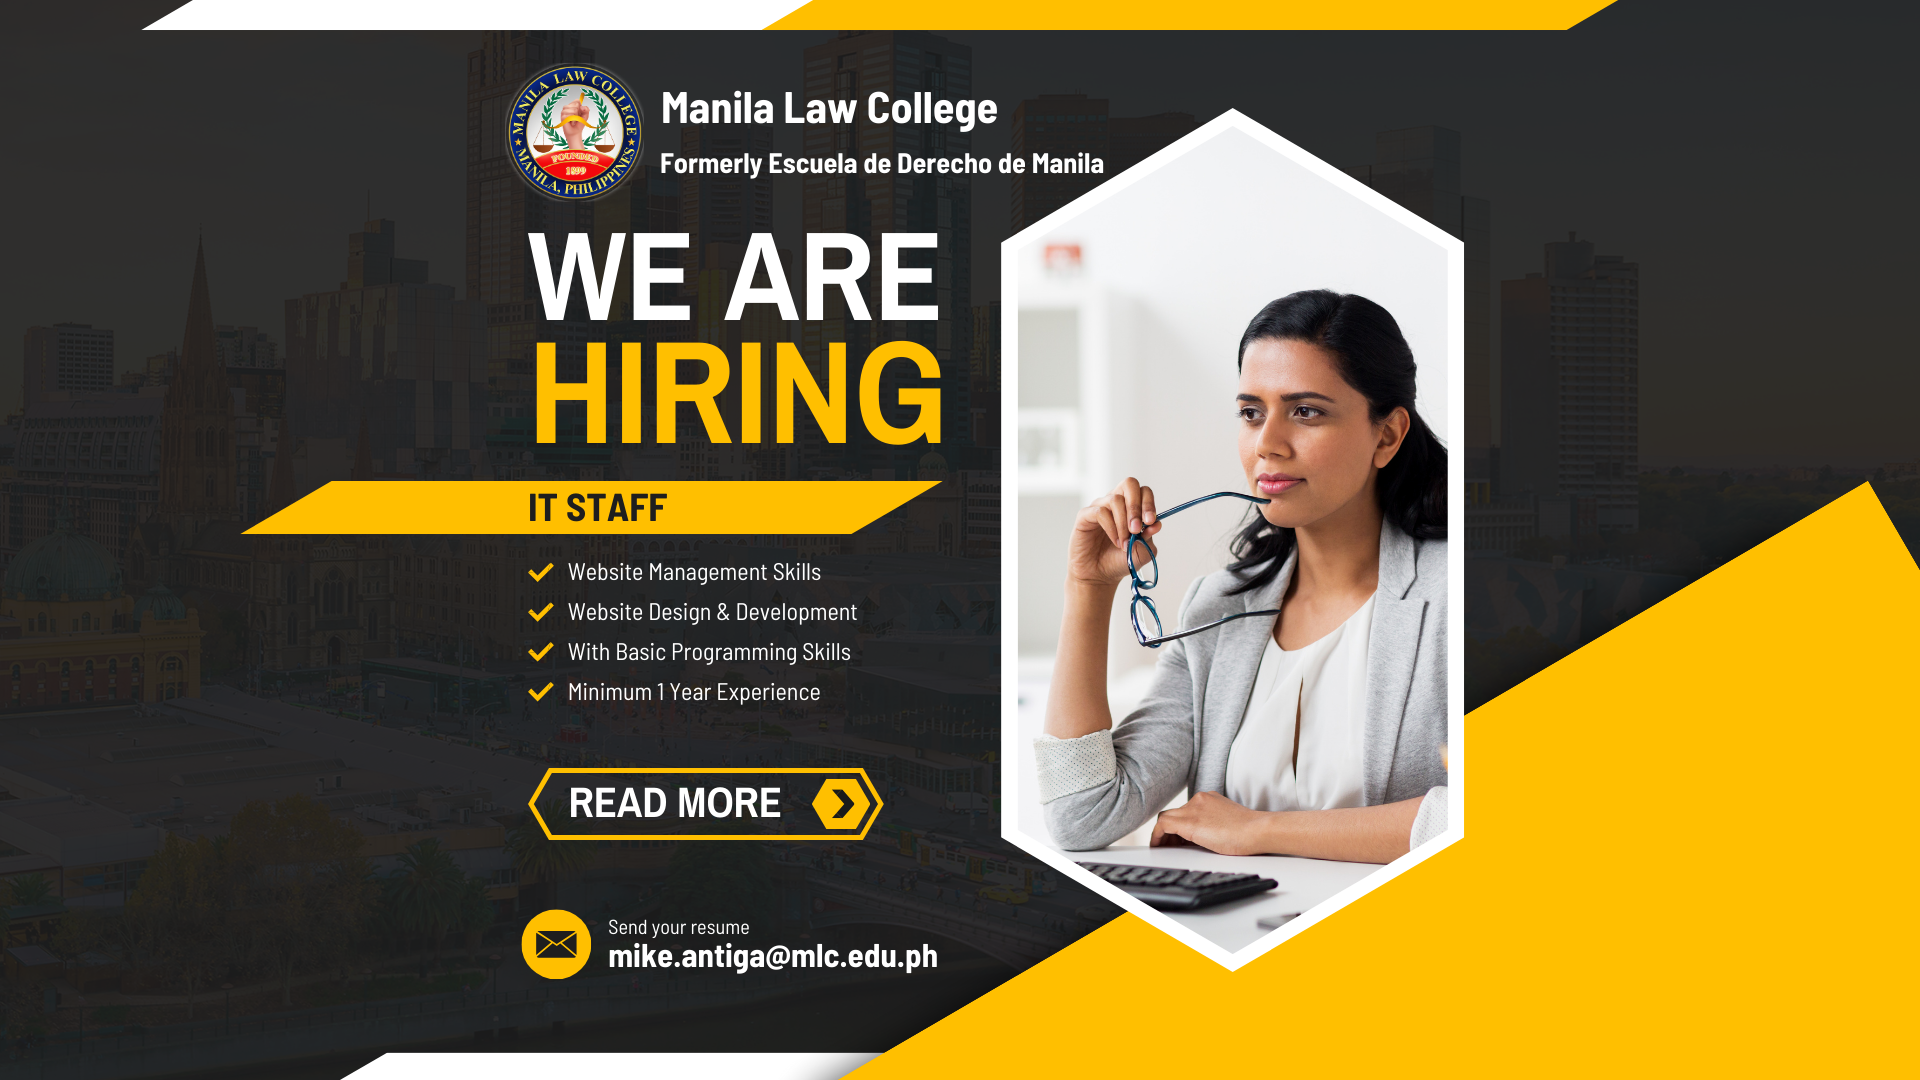 Manila Law Seeks Skilled and Experienced IT Professional for Home-Based Position